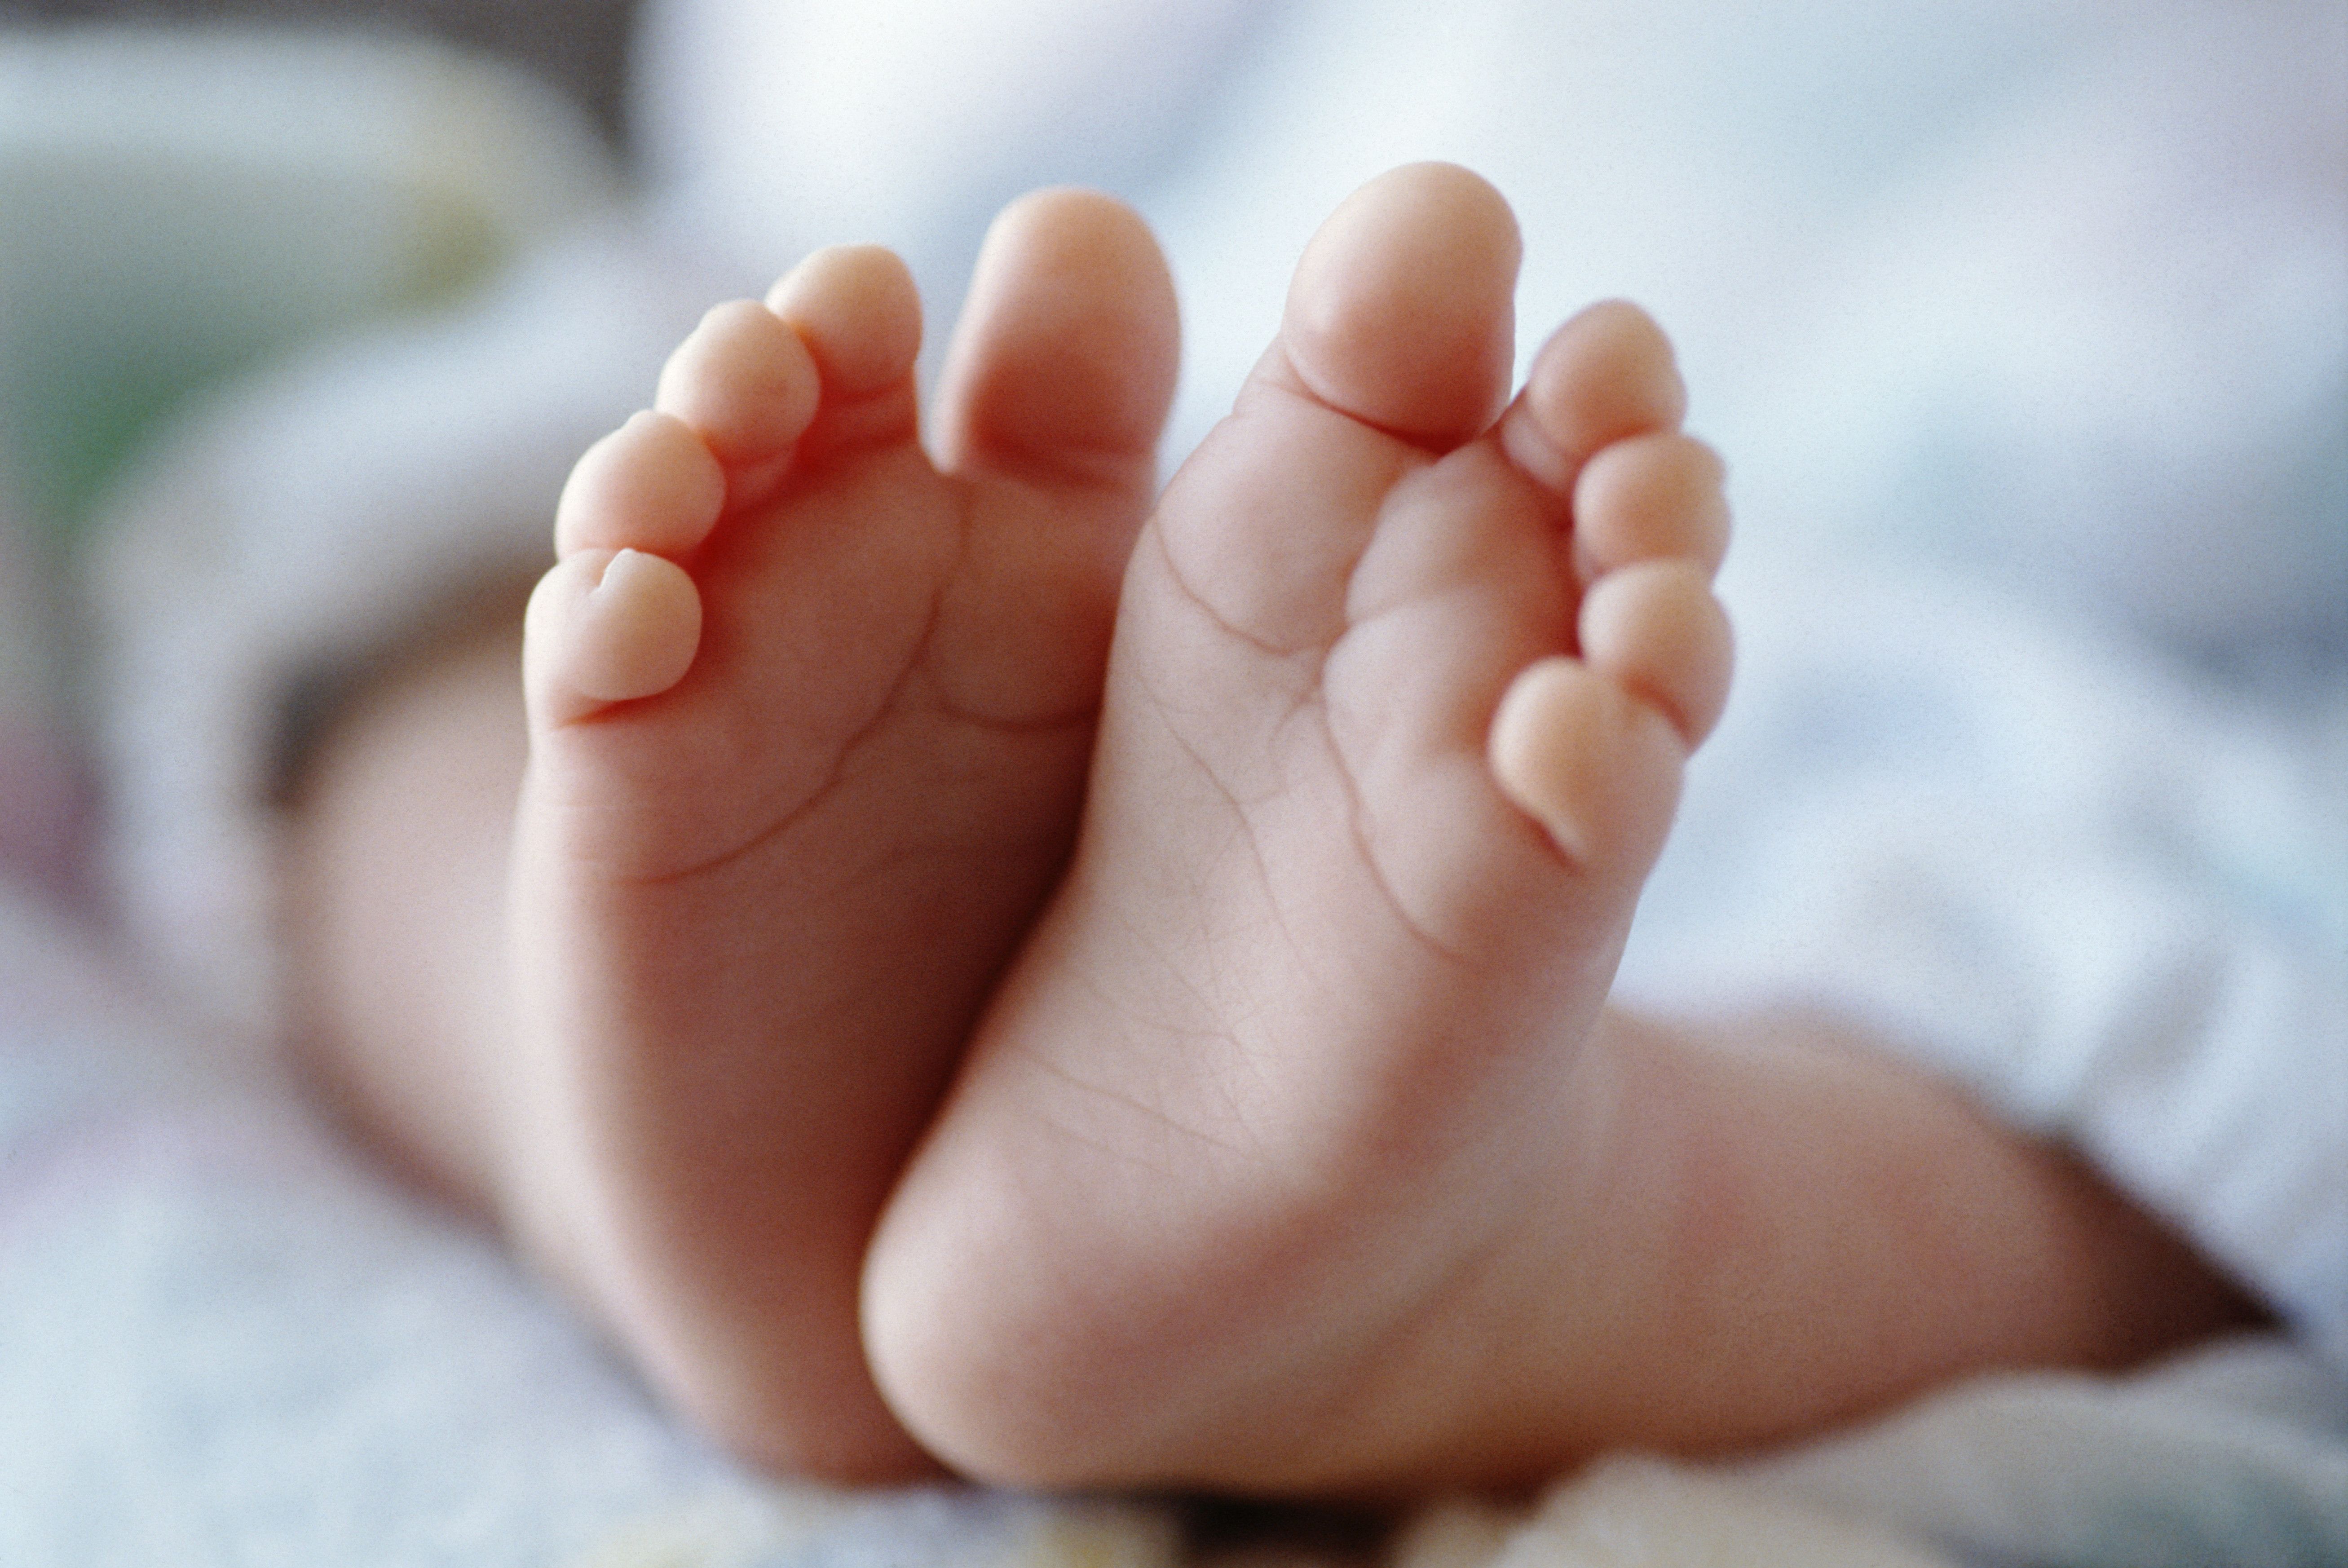 Baby Foot Photos, Download The BEST Free Baby Foot Stock Photos & HD Images